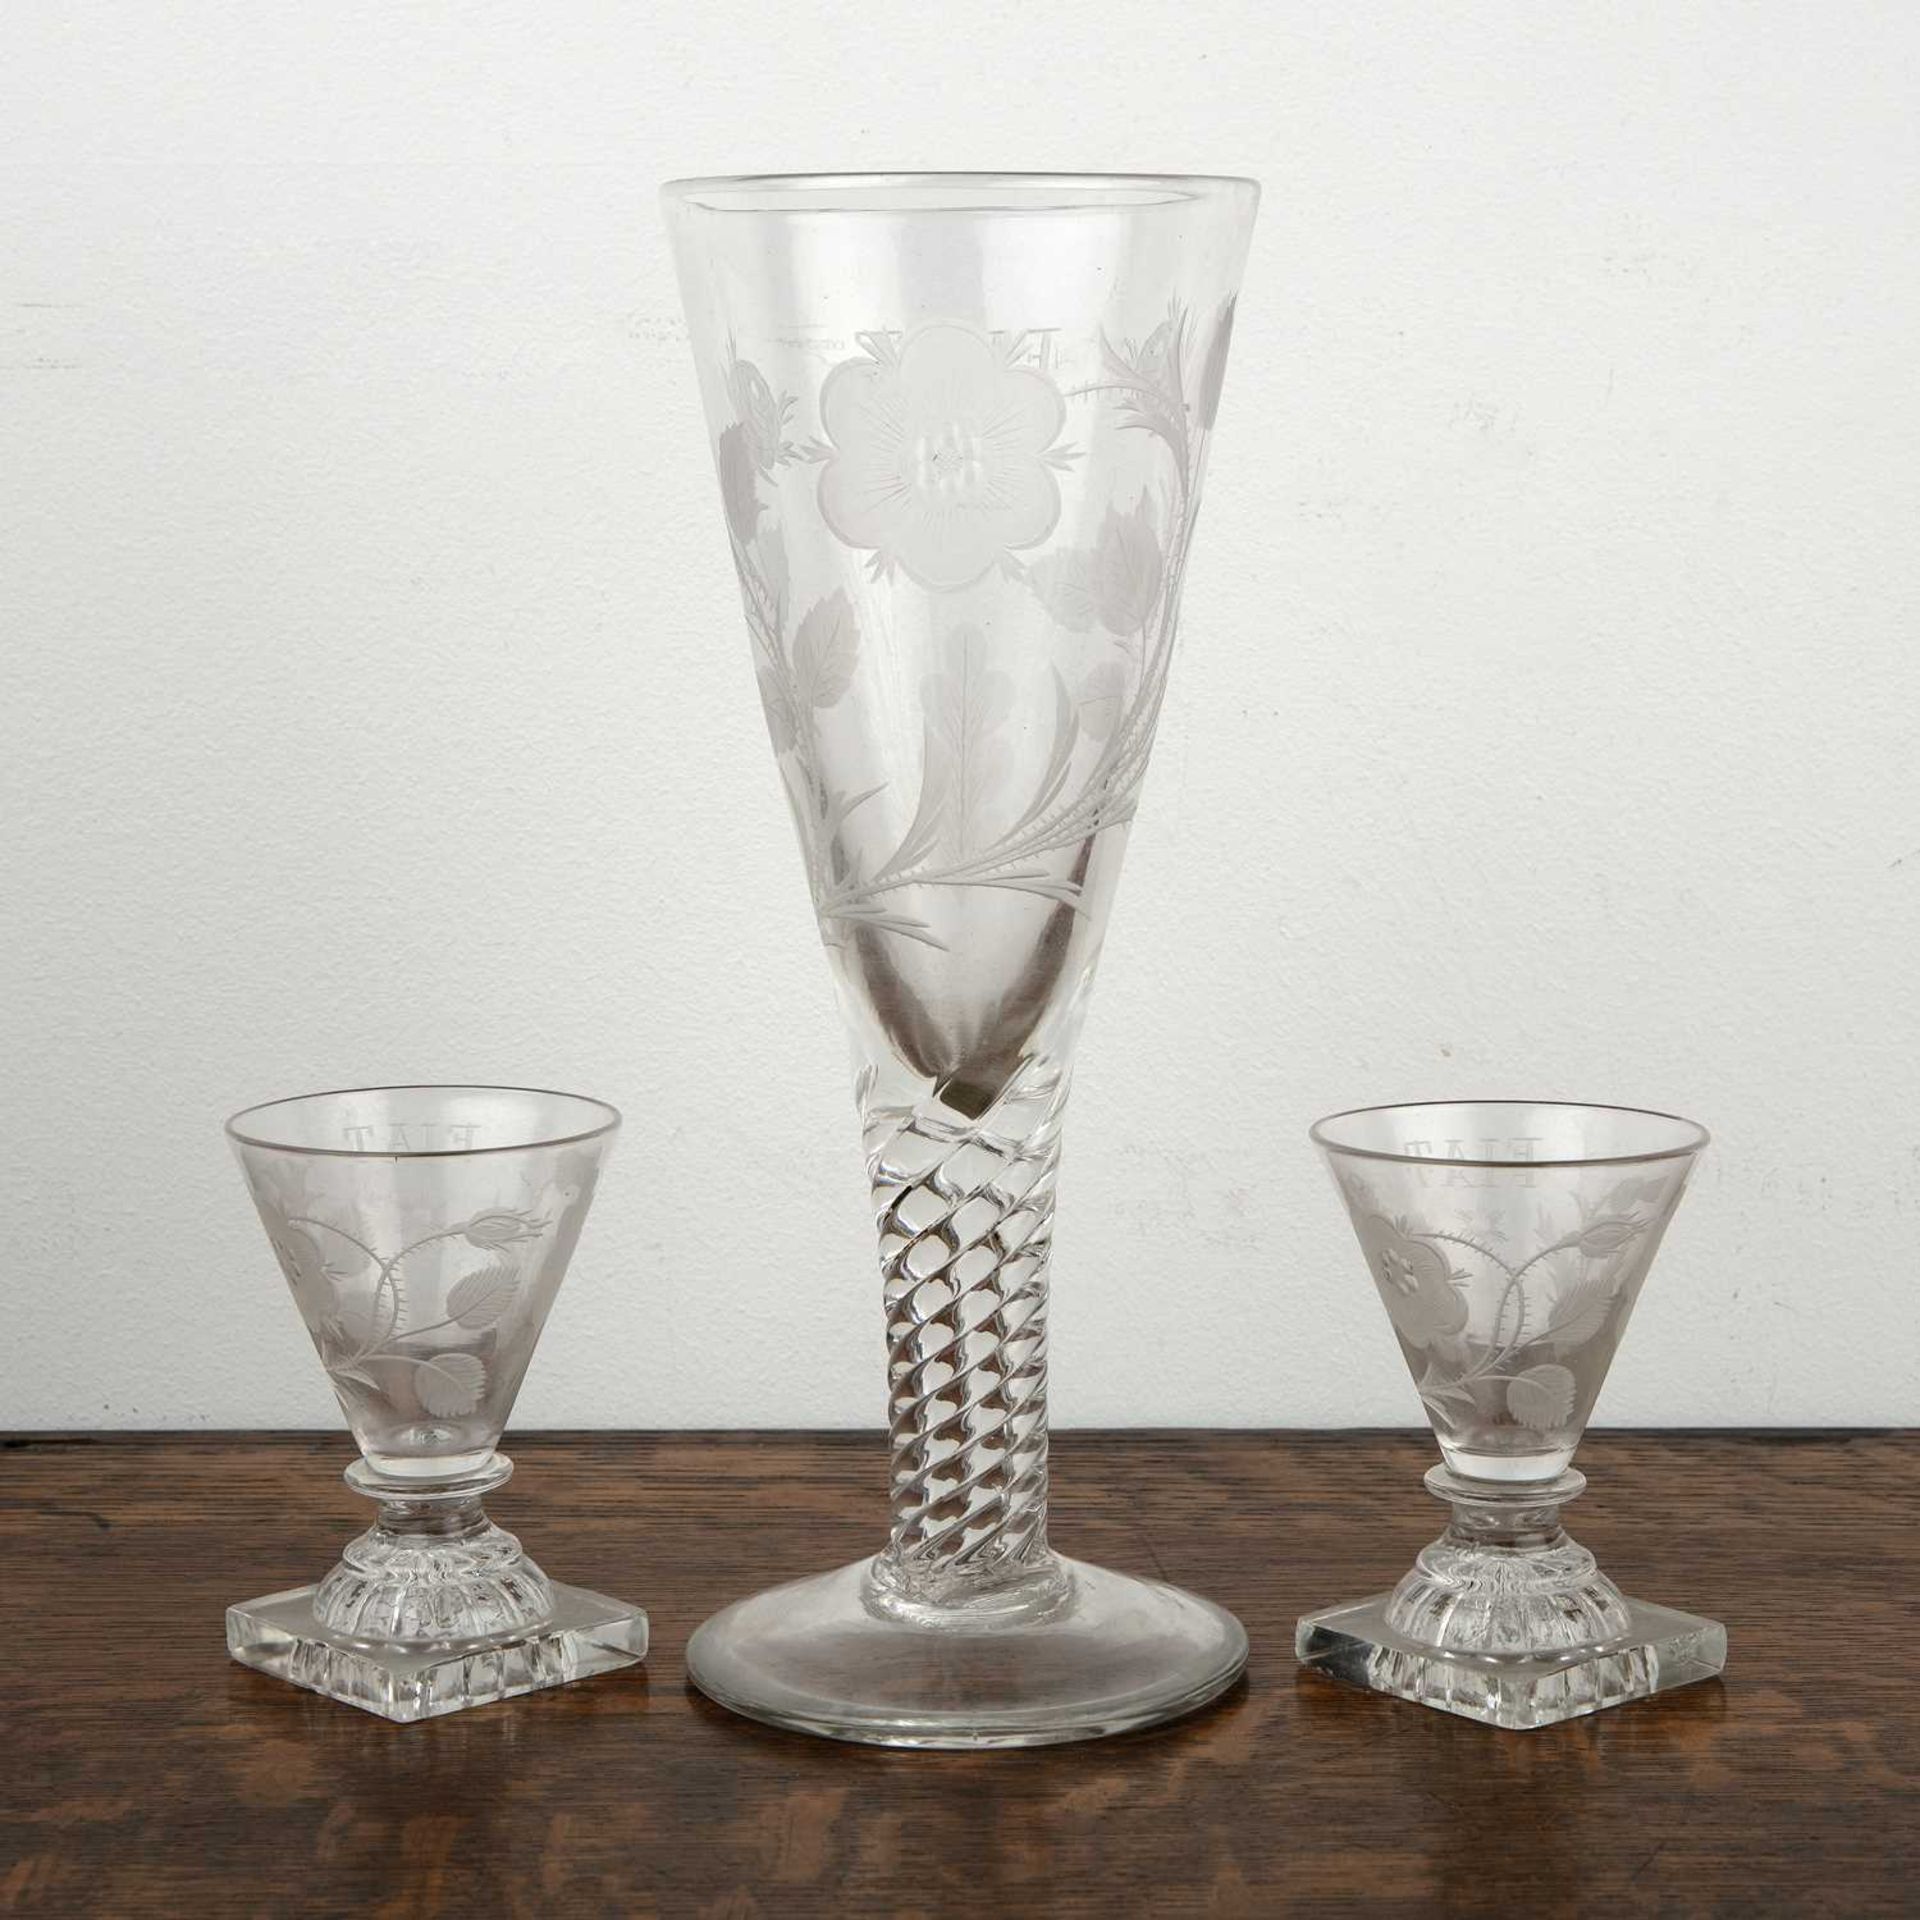 Jacobite revival 'Fiat' glass of trumpet form, engraved with Fiat above a star and oakleaf, 27cm - Bild 2 aus 2